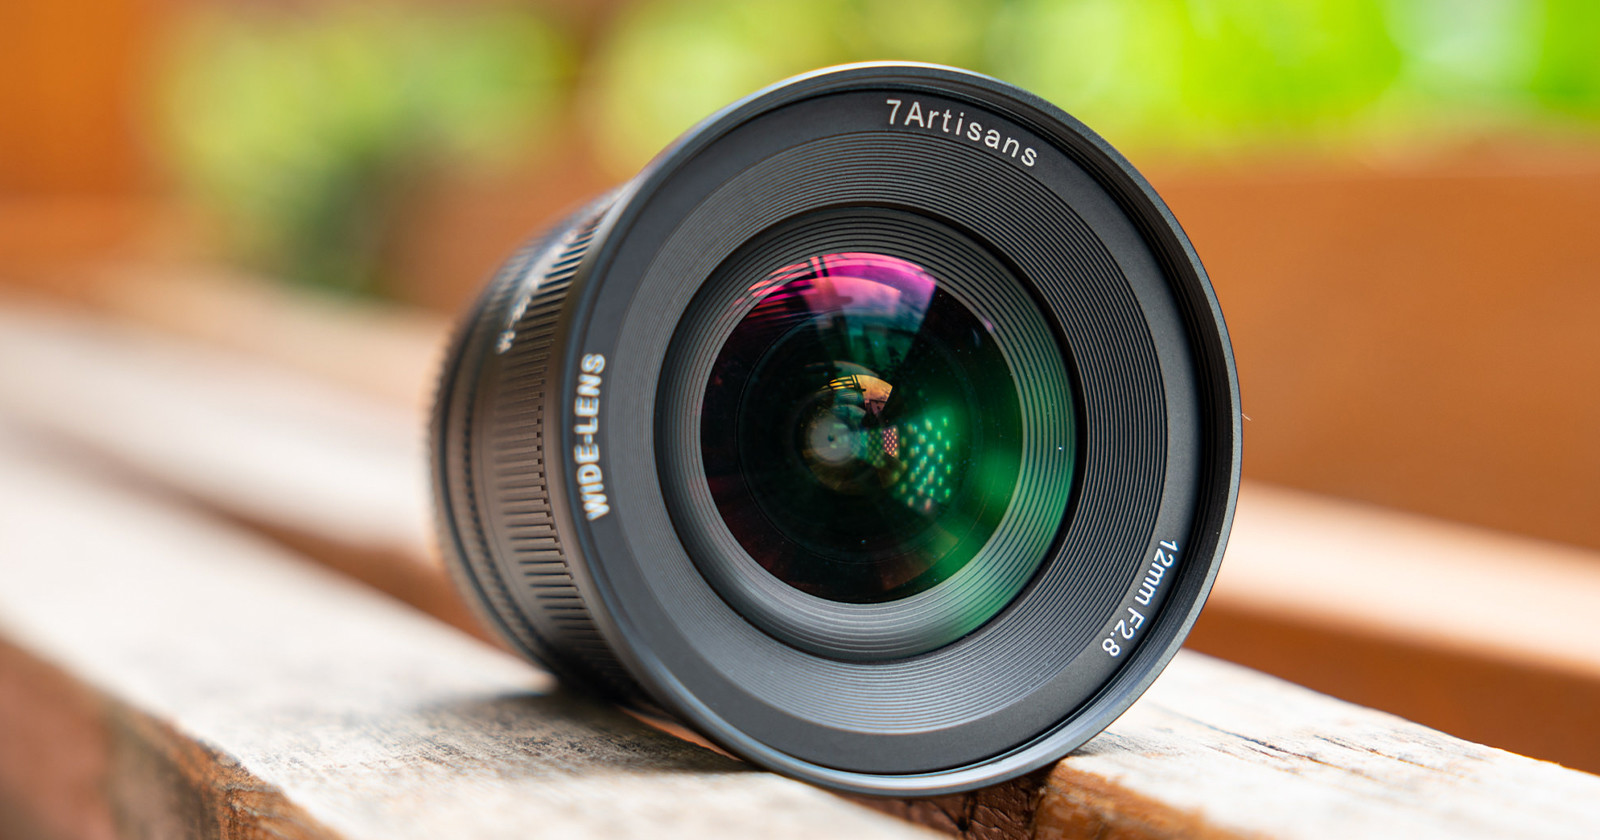 New 7Artisans 12mm f/2.8 II Wide-Angle APS-C Lens is for Mirrorless